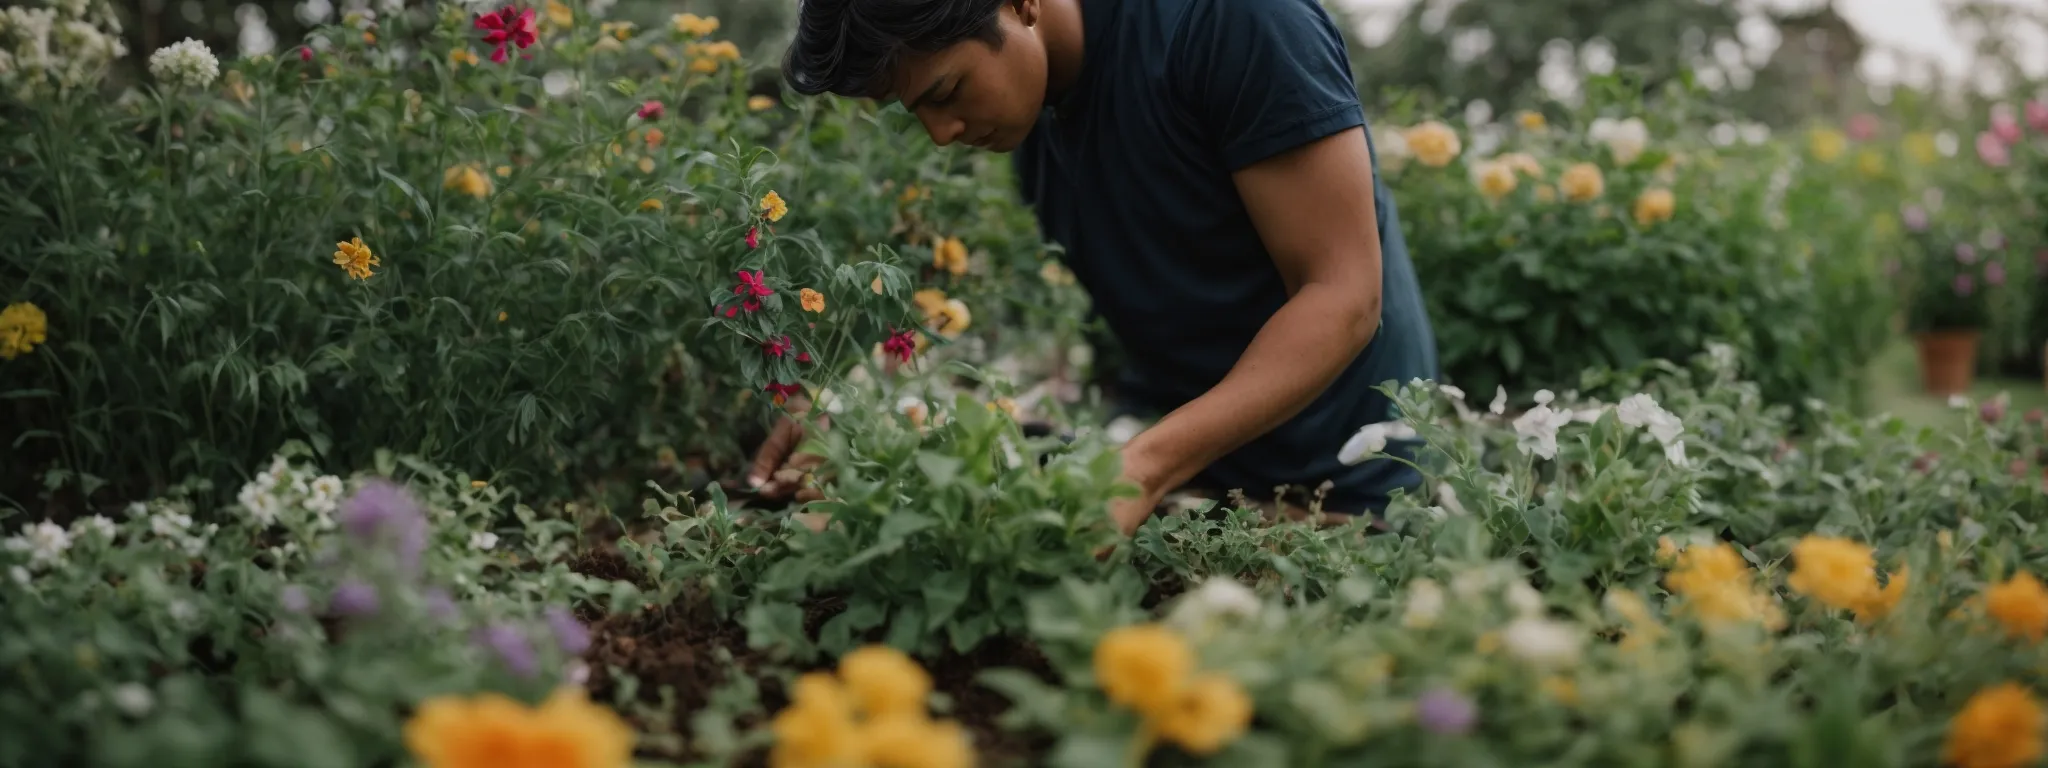 a close-up of a gardener carefully selecting healthy flowers to plant in a lush garden.